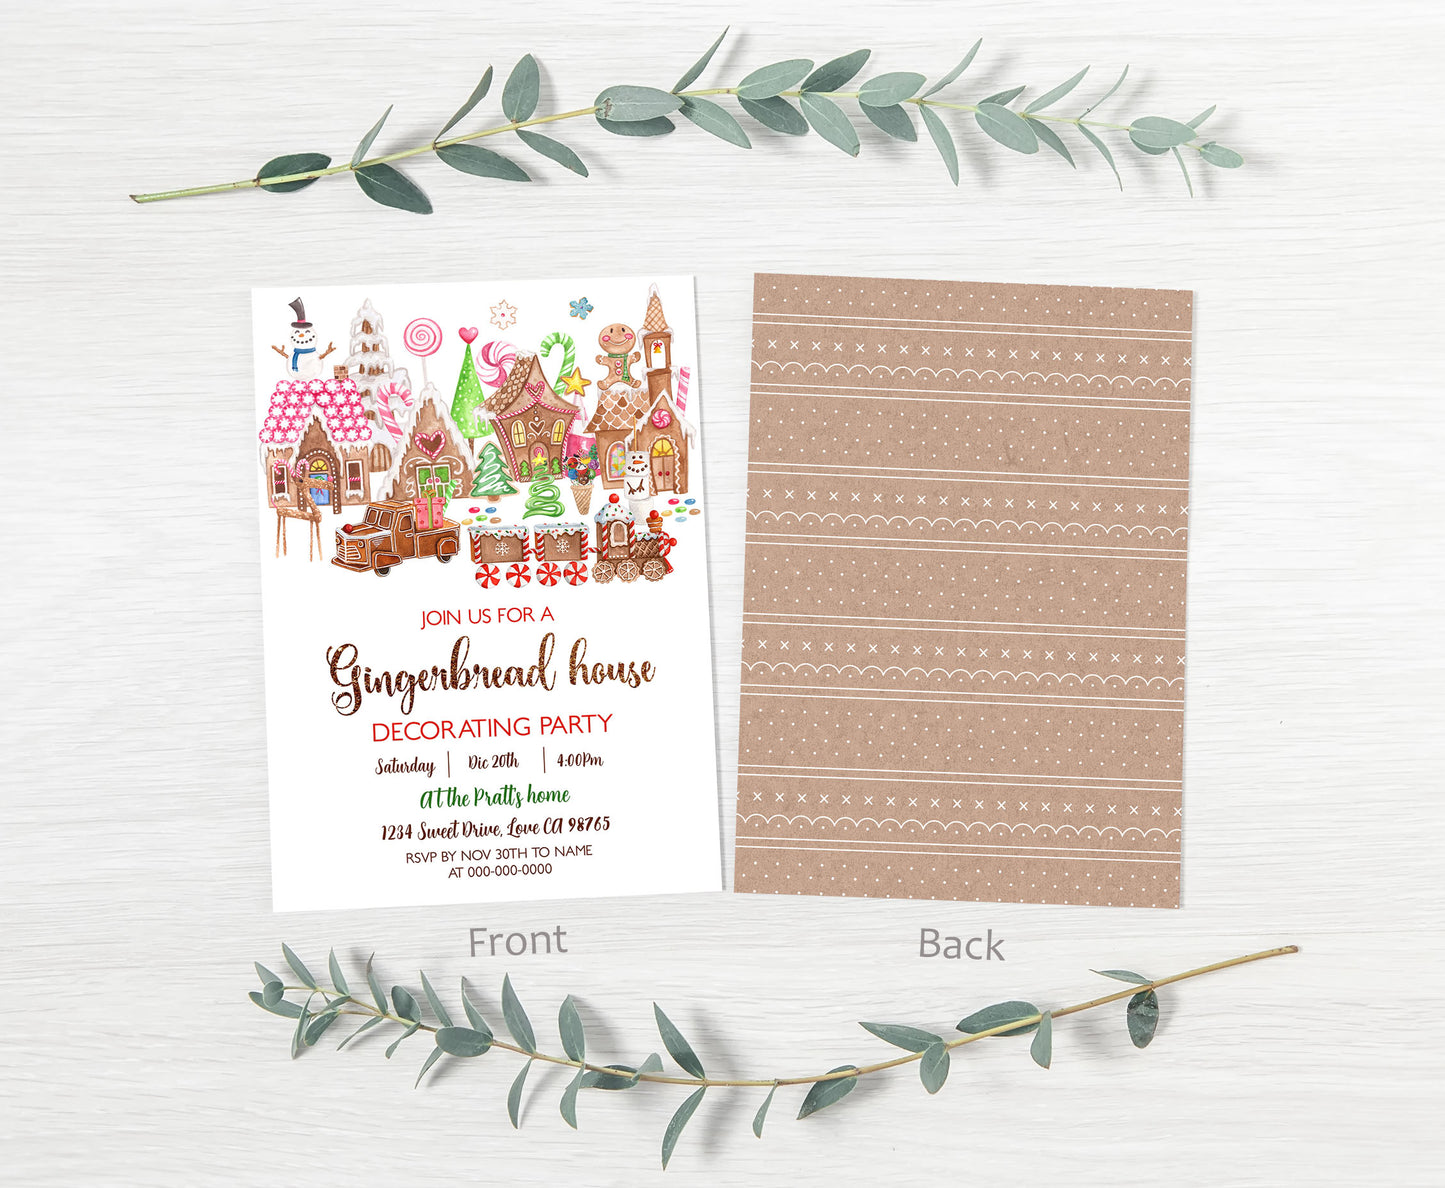 Gingerbread house decorating party invitation | Editable Christmas cookie party invite - 112F